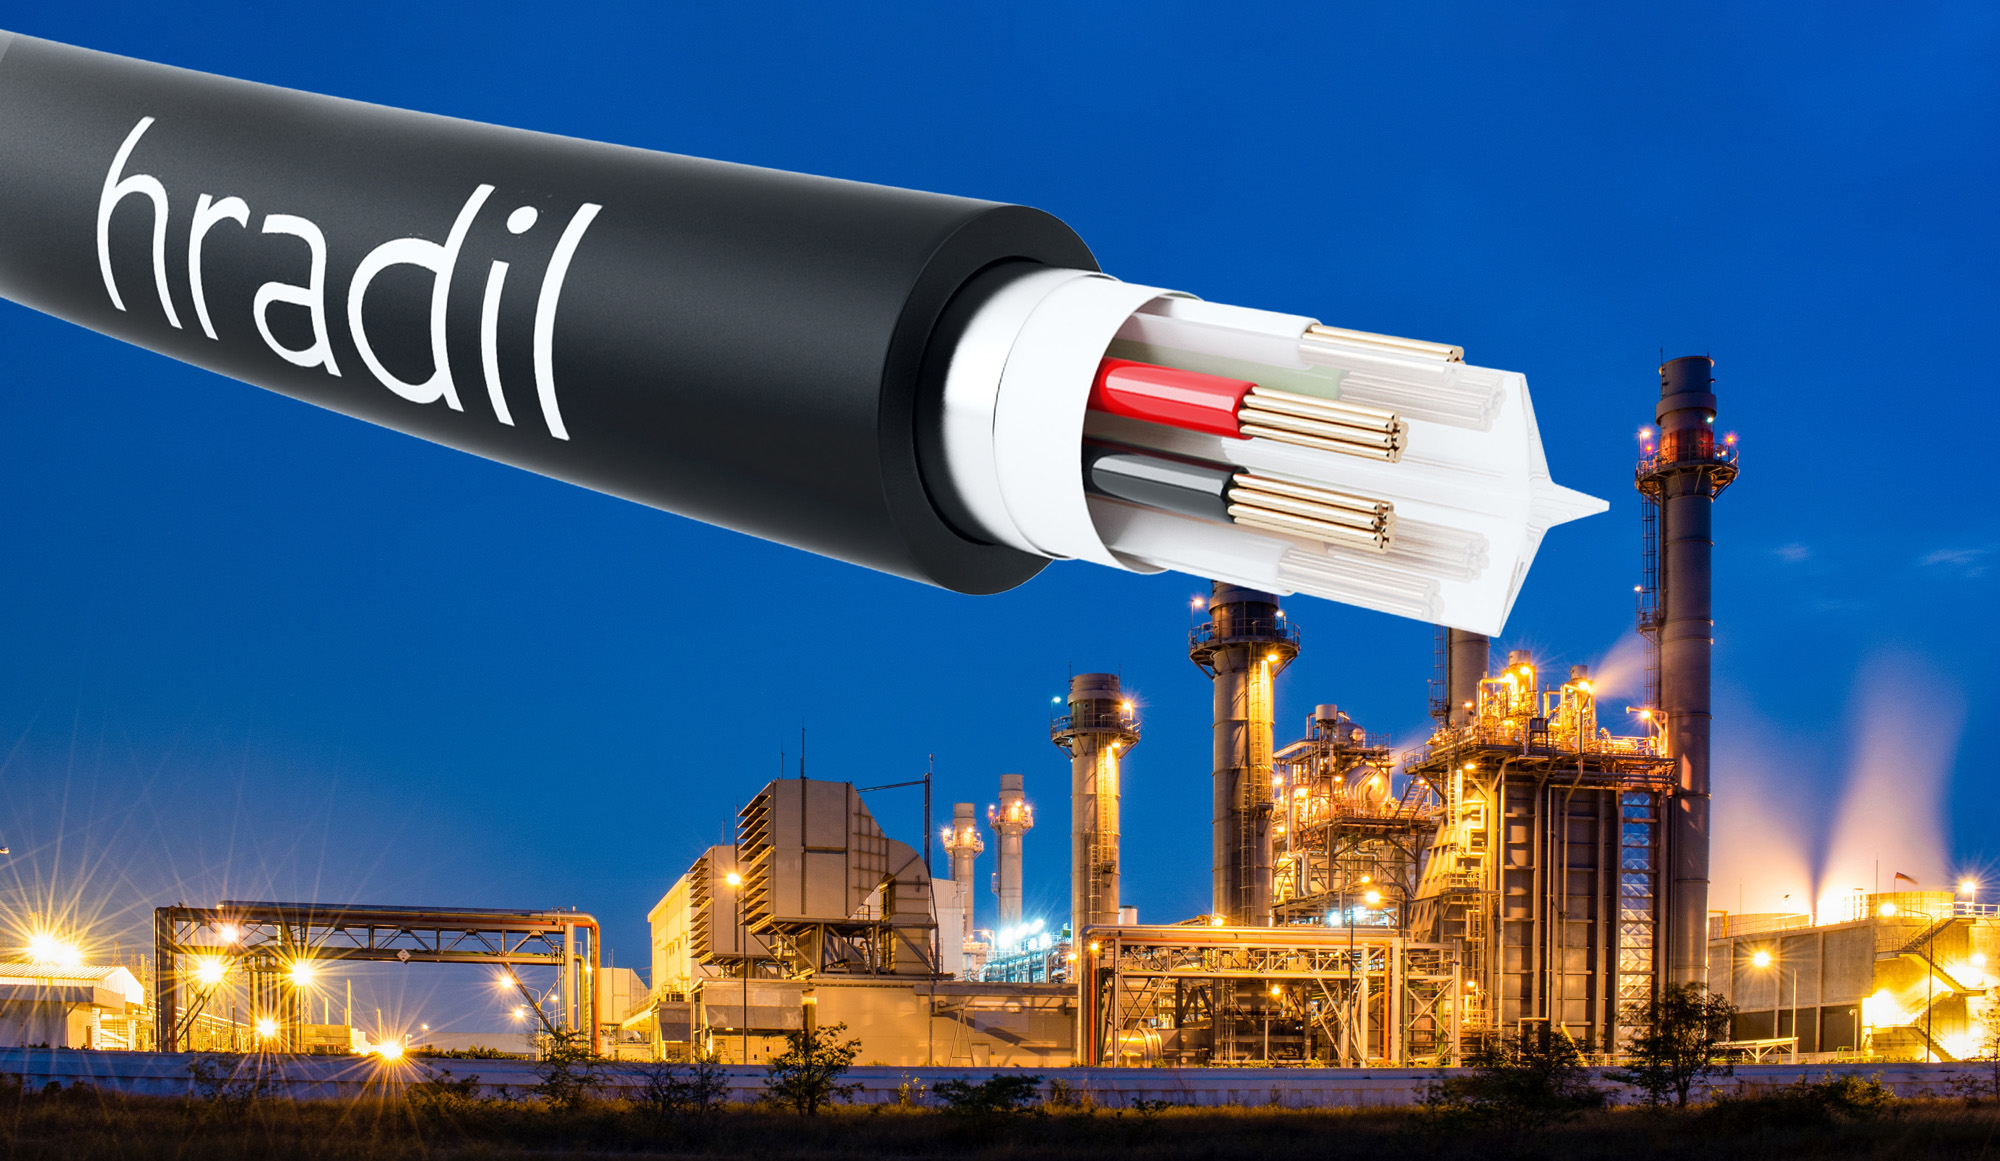 The HRADIL high-performance hybrid cable unites four important qualities:  Power chain capability, rugged outdoor credentials, Ethernet and power transmission capability